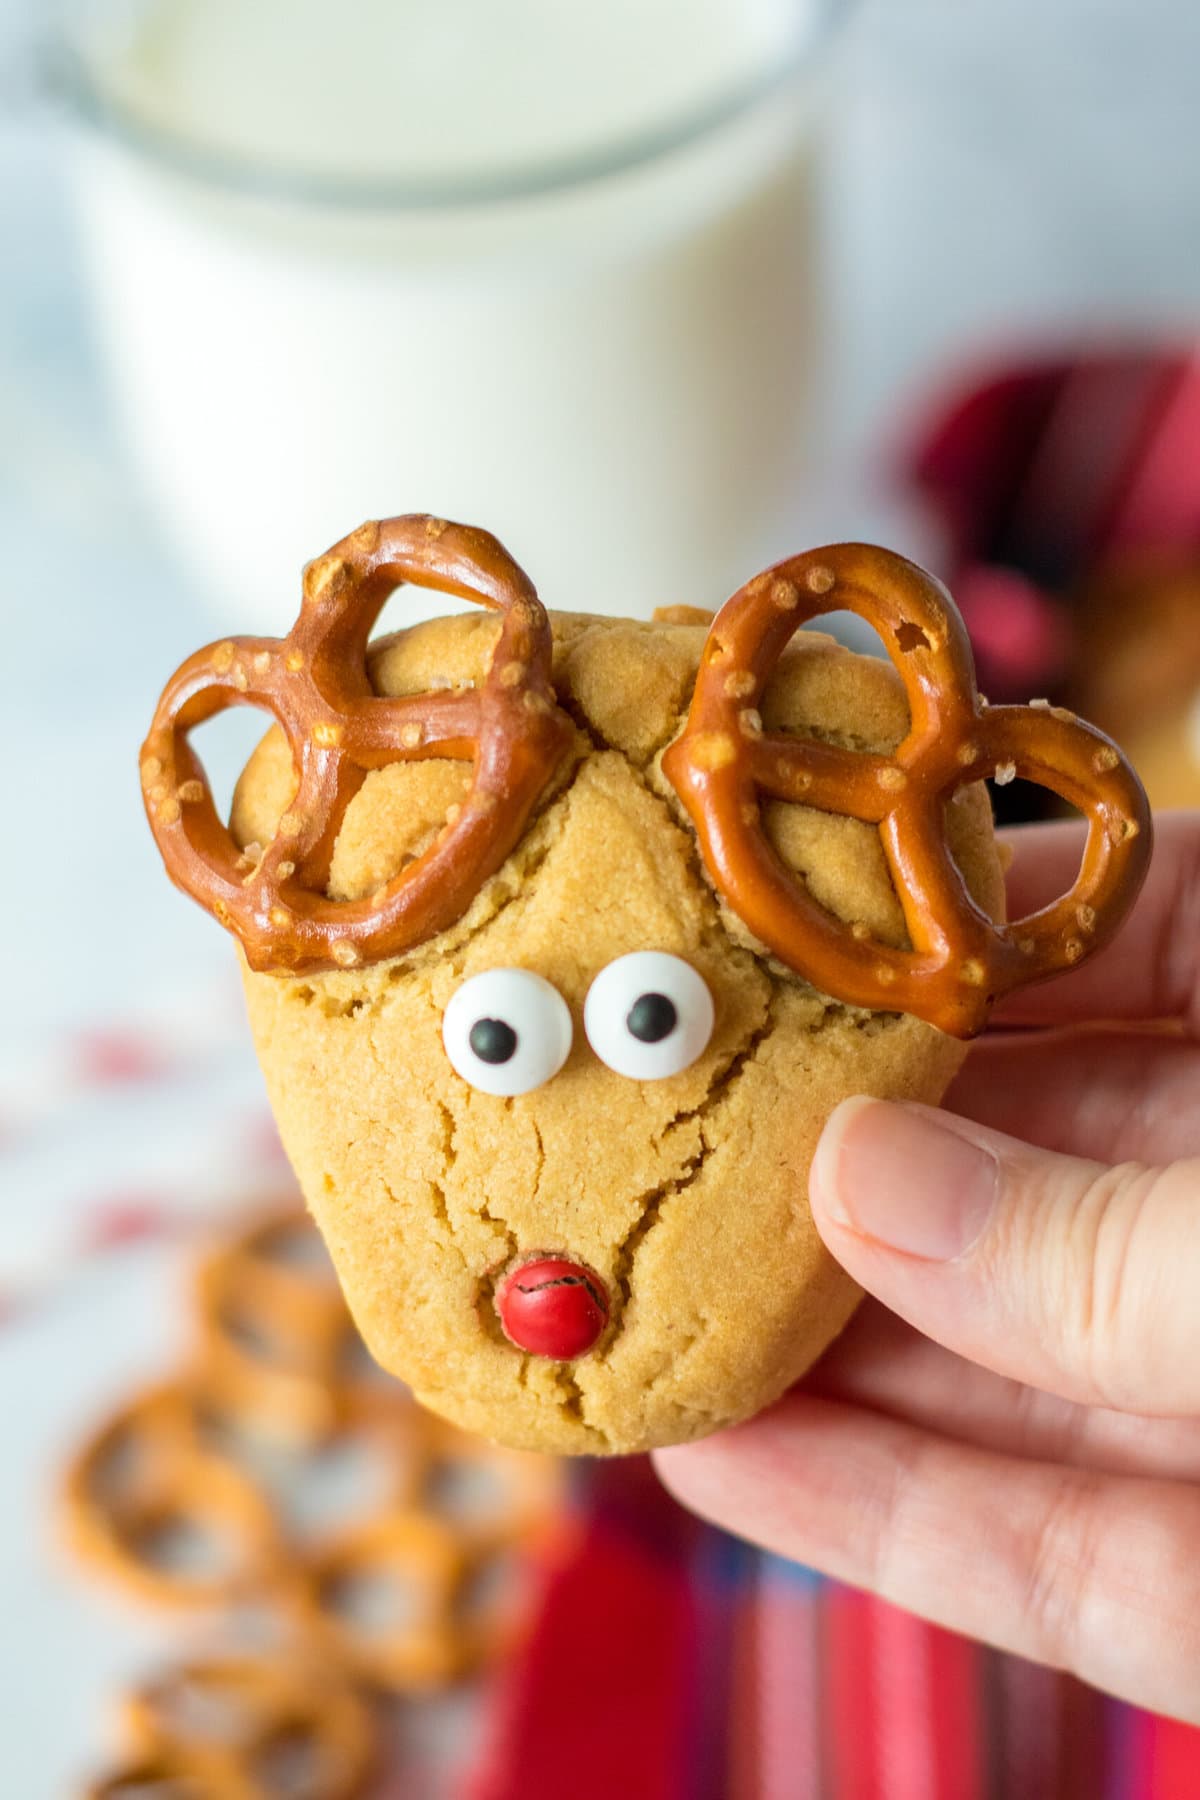 A hand holding one of the Peanut Butter Reindeer Cookies.